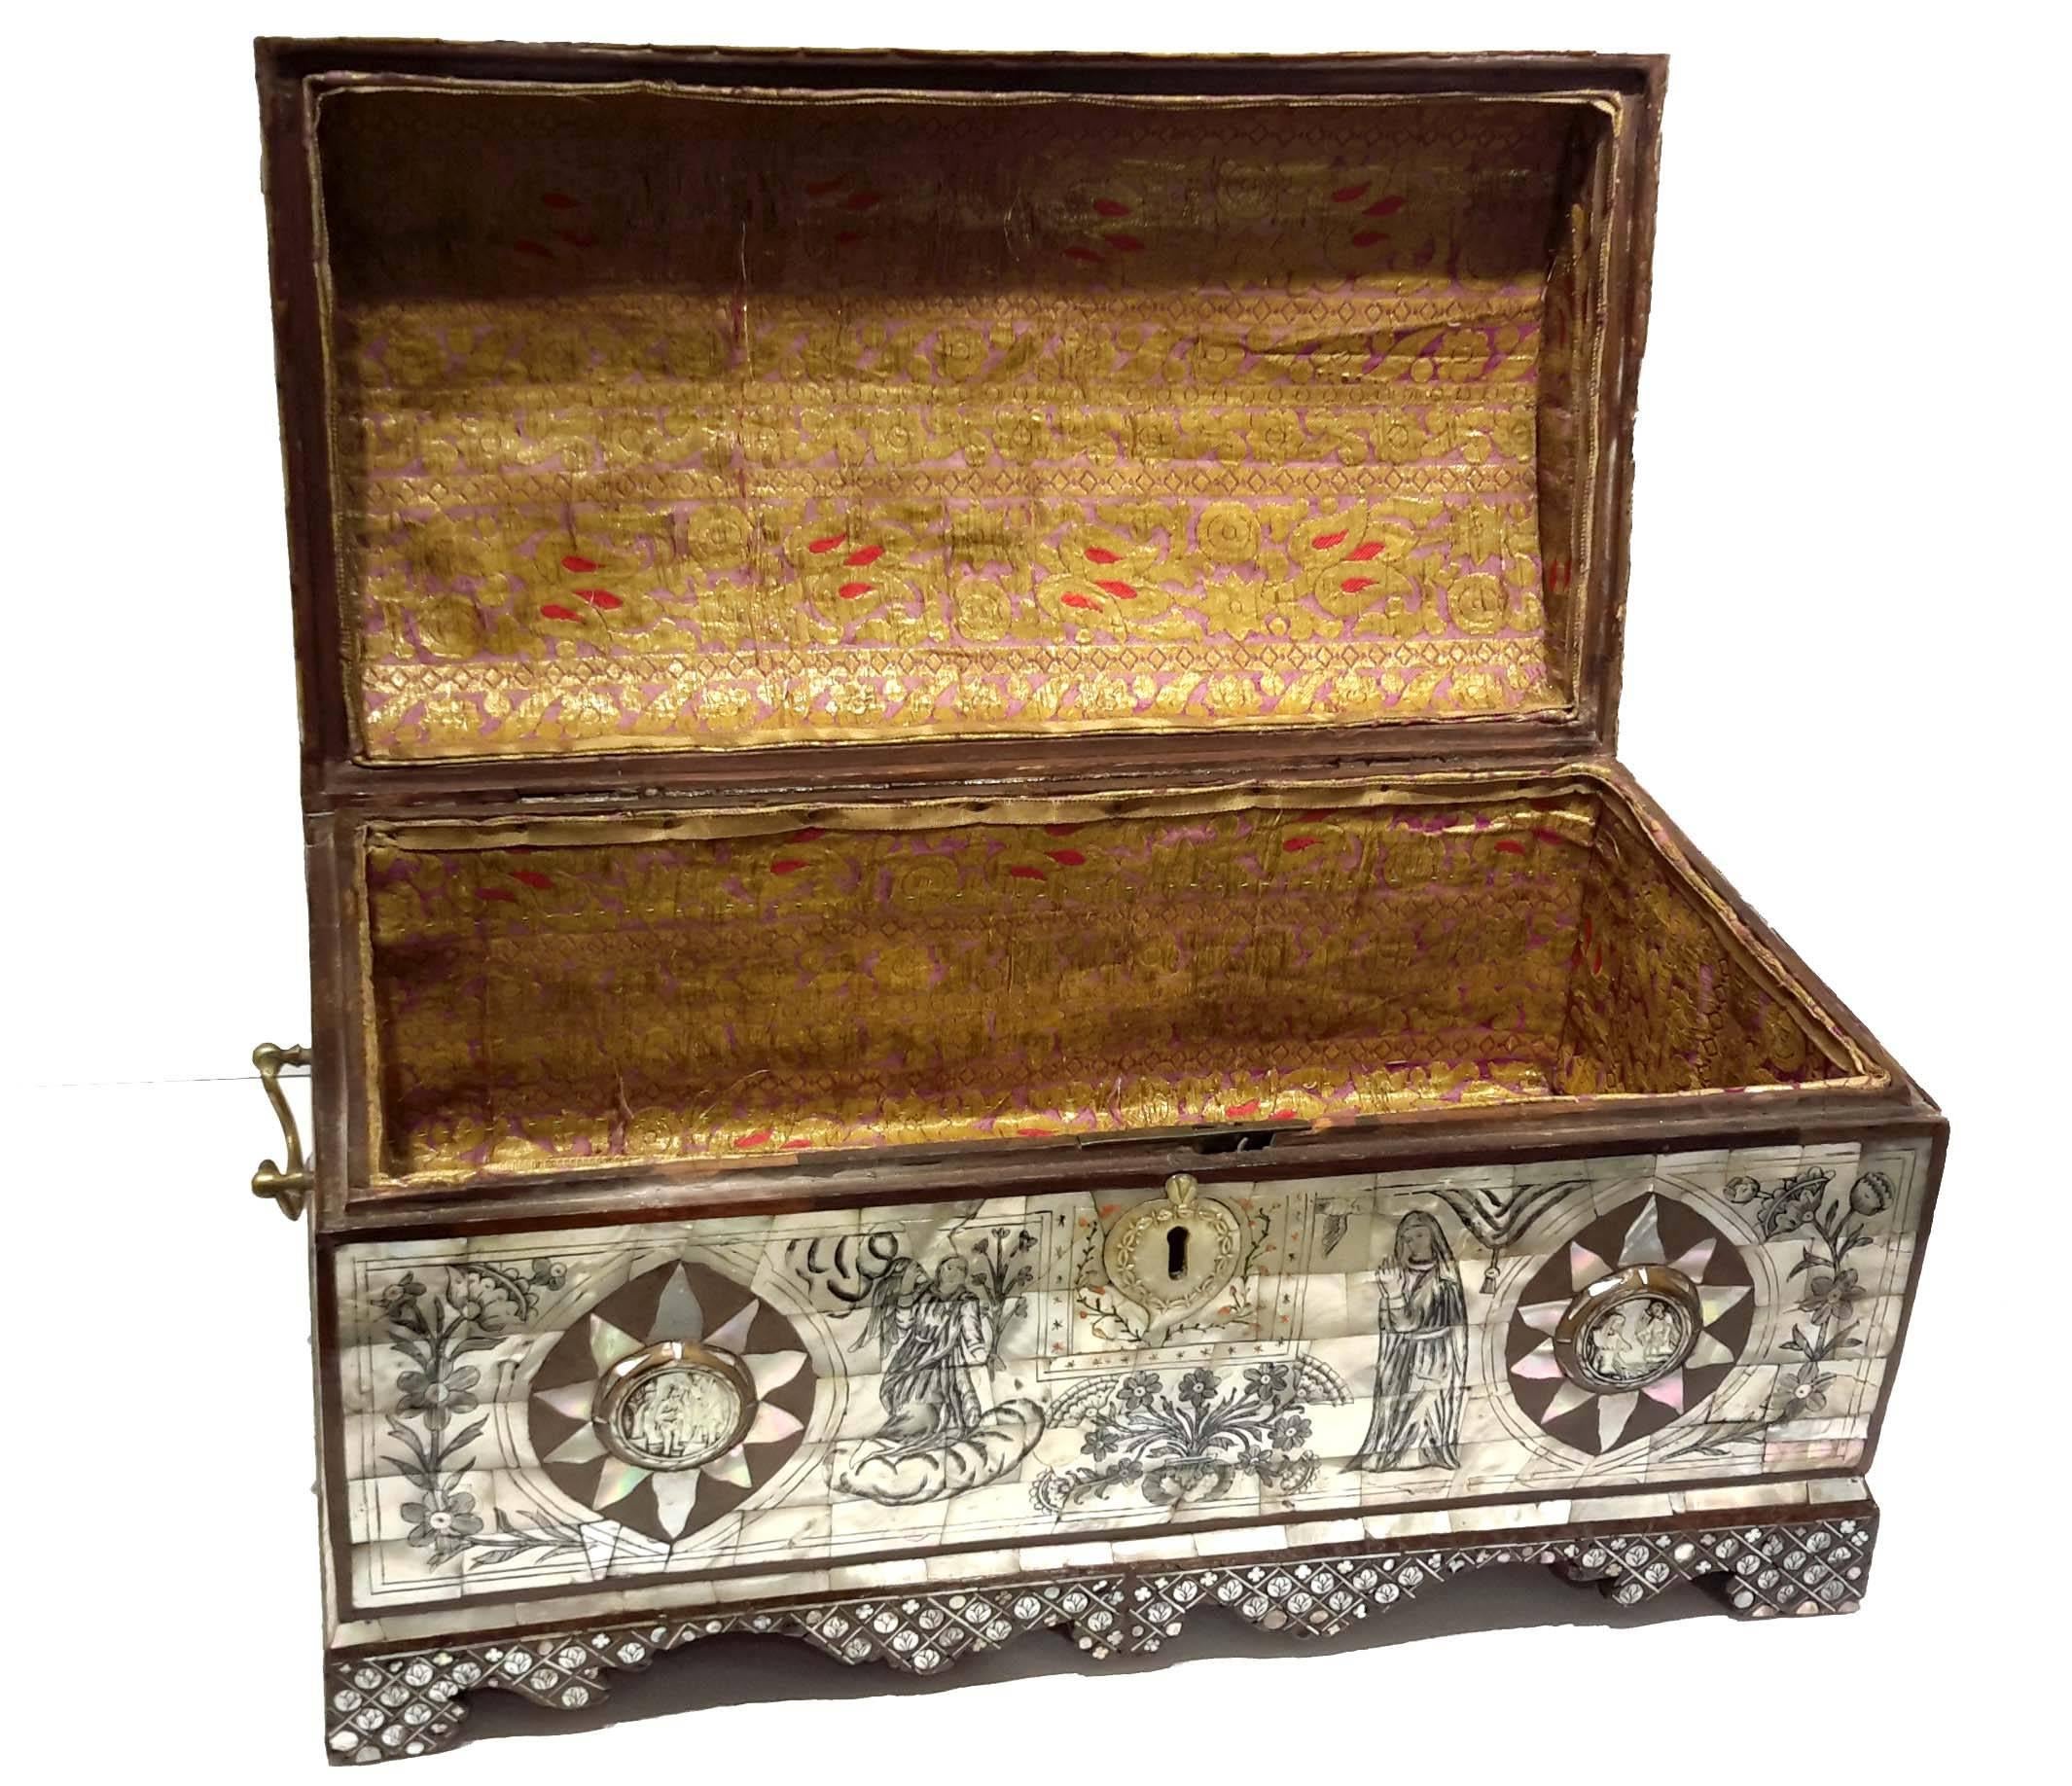 Israeli Rare Mother-of-Pearl Decorated Reliquary Coffer, Jerusalem, 18th Century